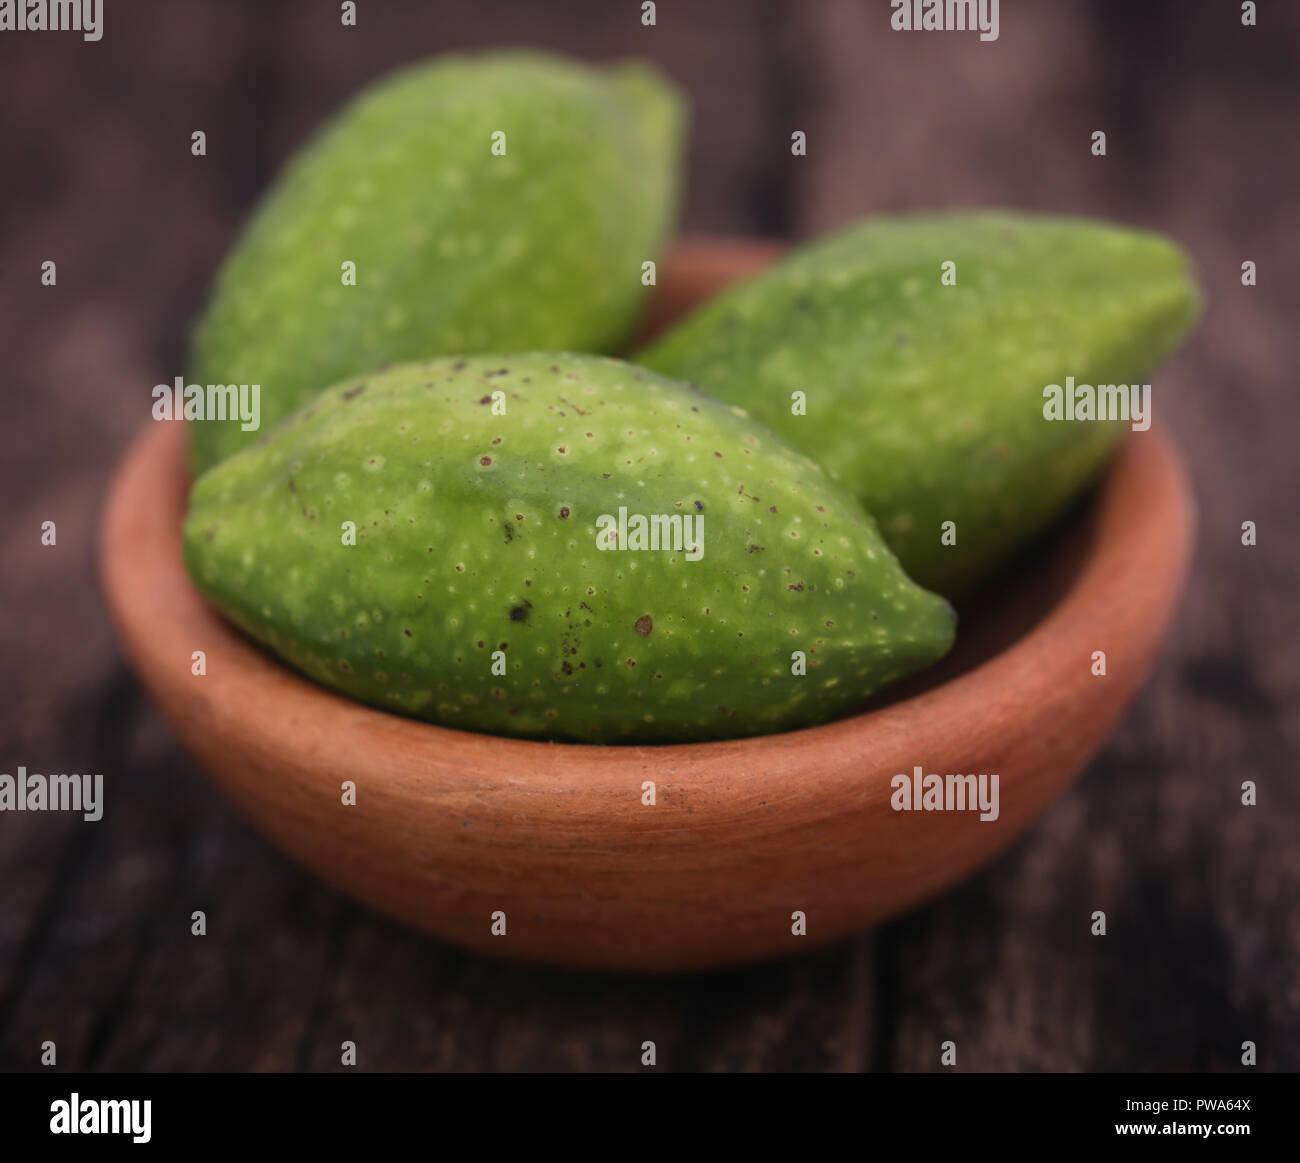 Green haritaki fruits used as herbal medicine in various parts of the world Stock Photo